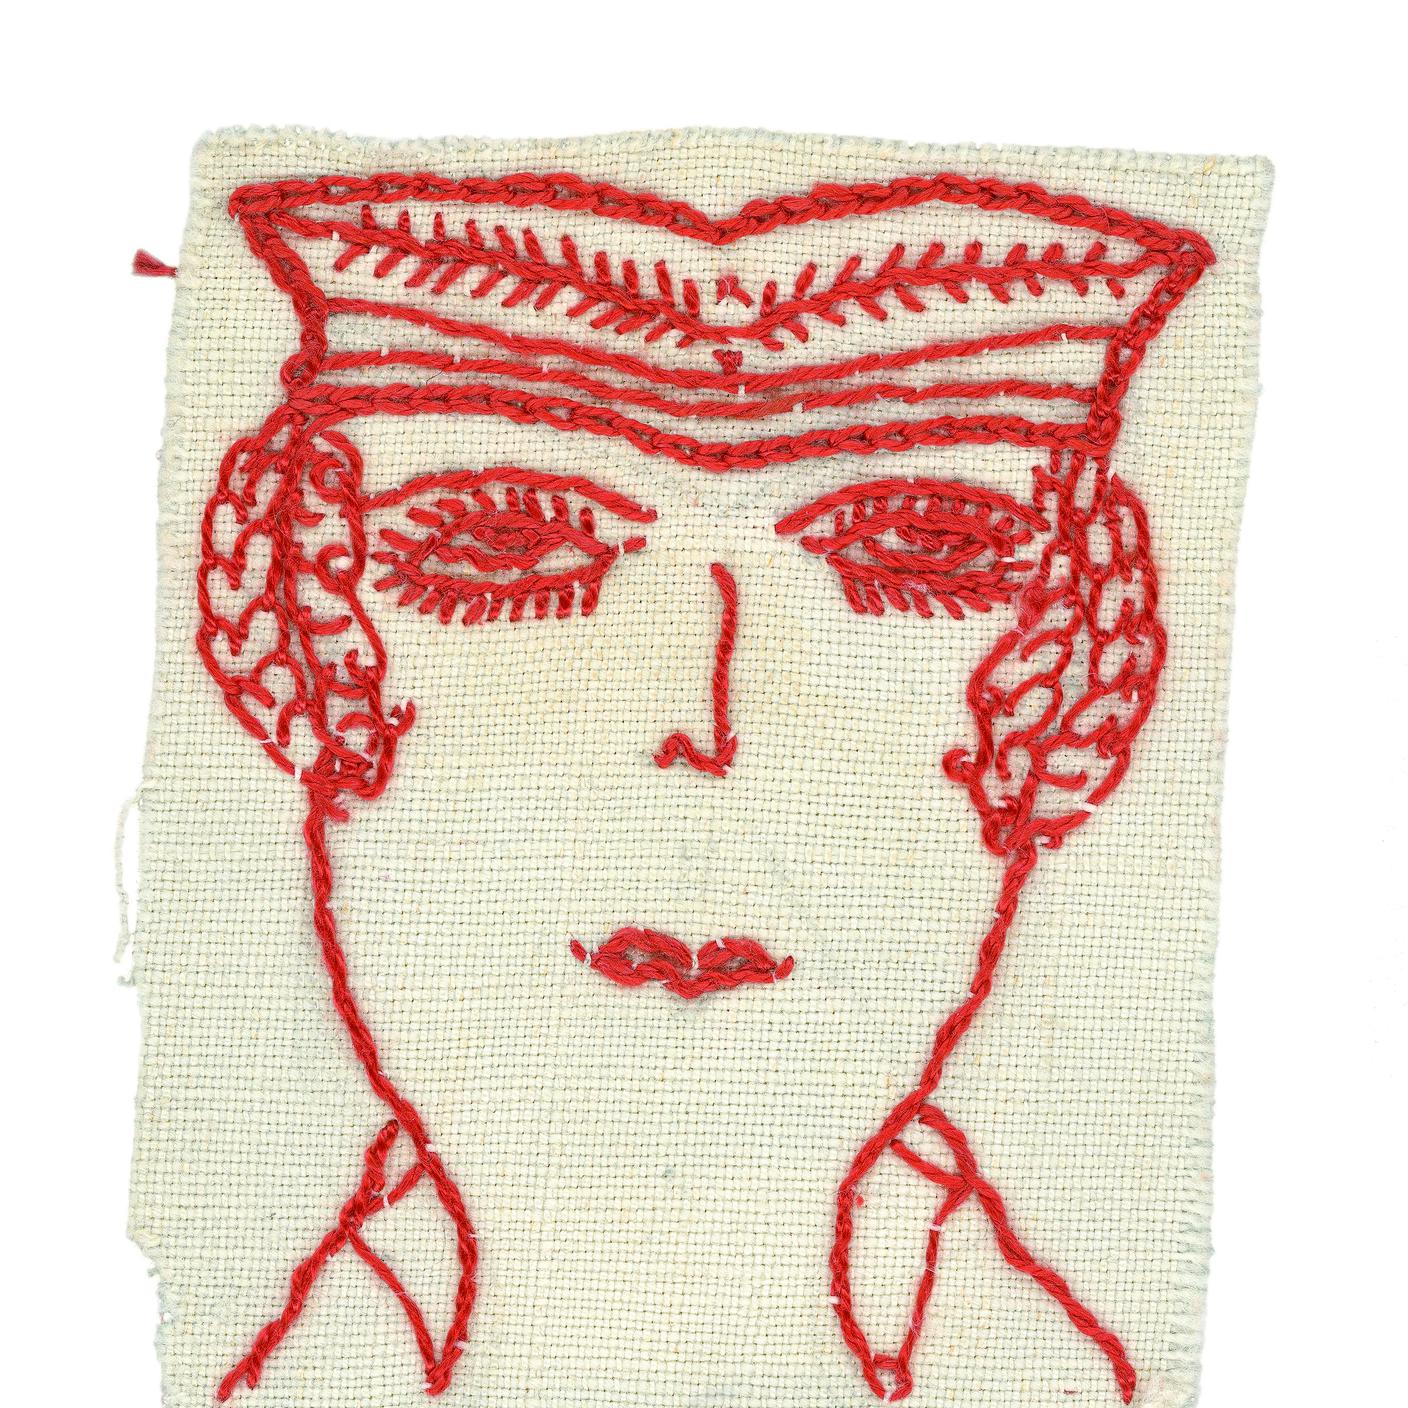 Bertha Morel, untitled, between 1936 and 1960, embroidery thread and graphite on texile, 8,7 x 7,1 cm